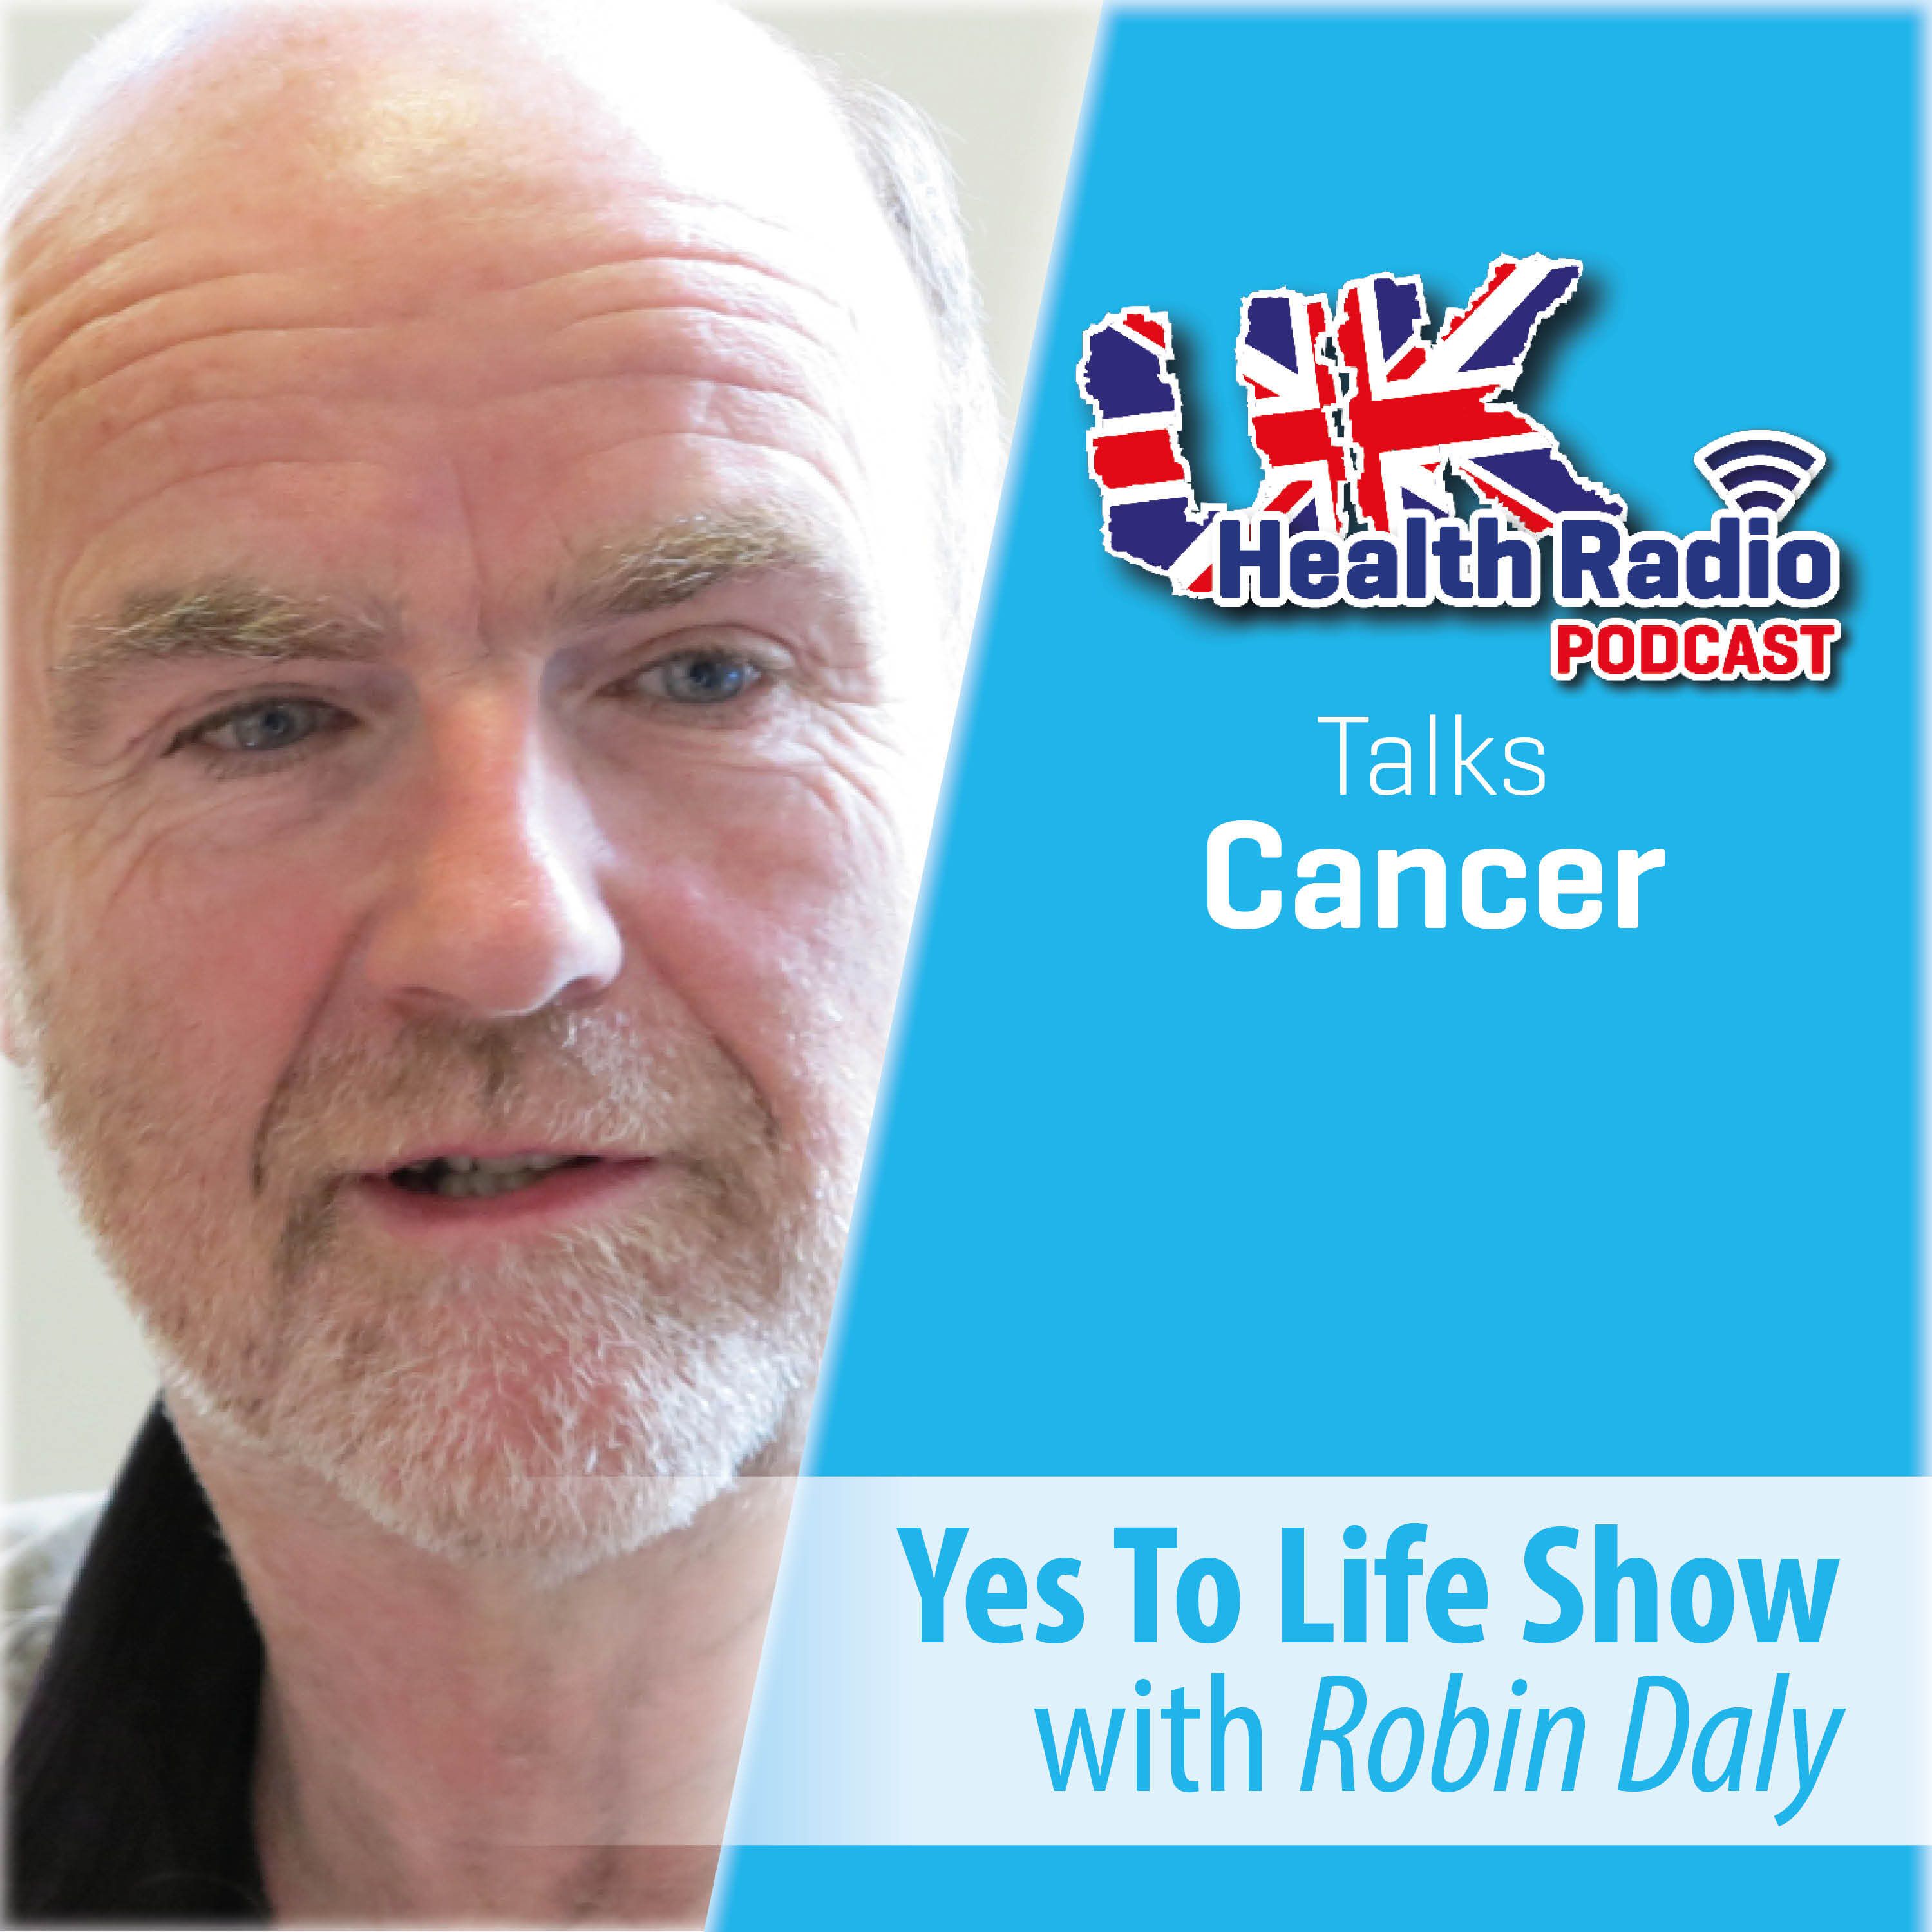 69: Yes To Life Show with Robin Daly - Episode 69